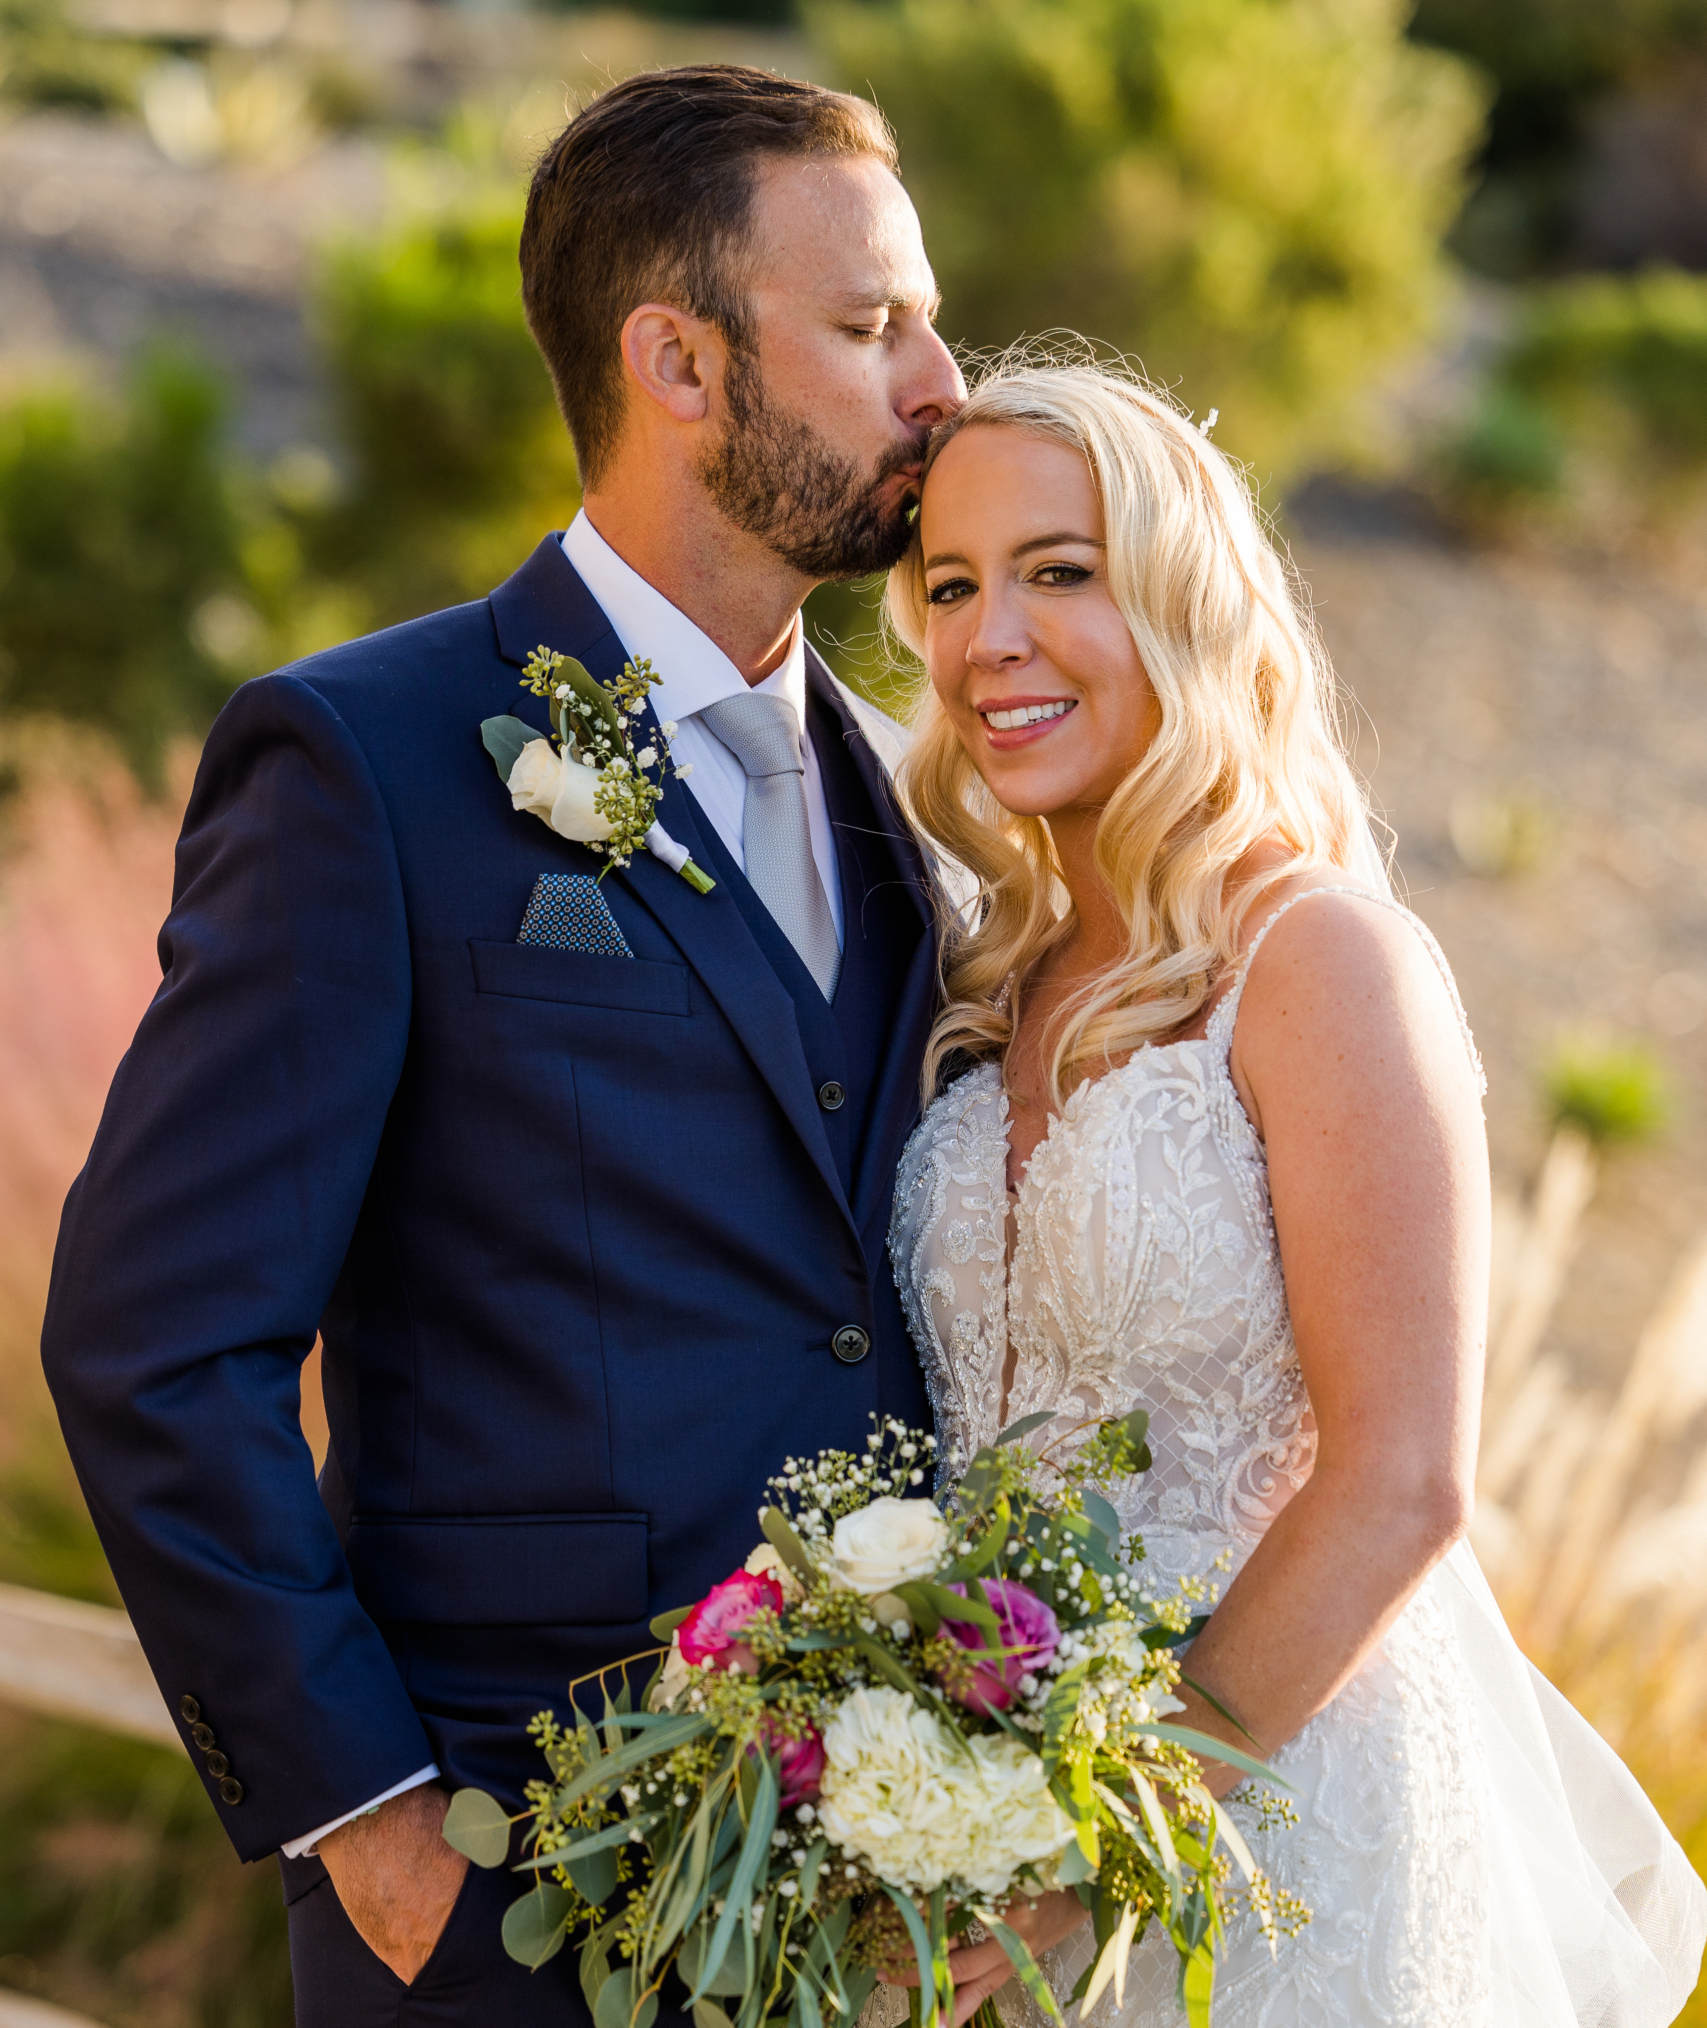 Real wedding couple at The Crossings Carlsbad captured by Carlsbad Photo